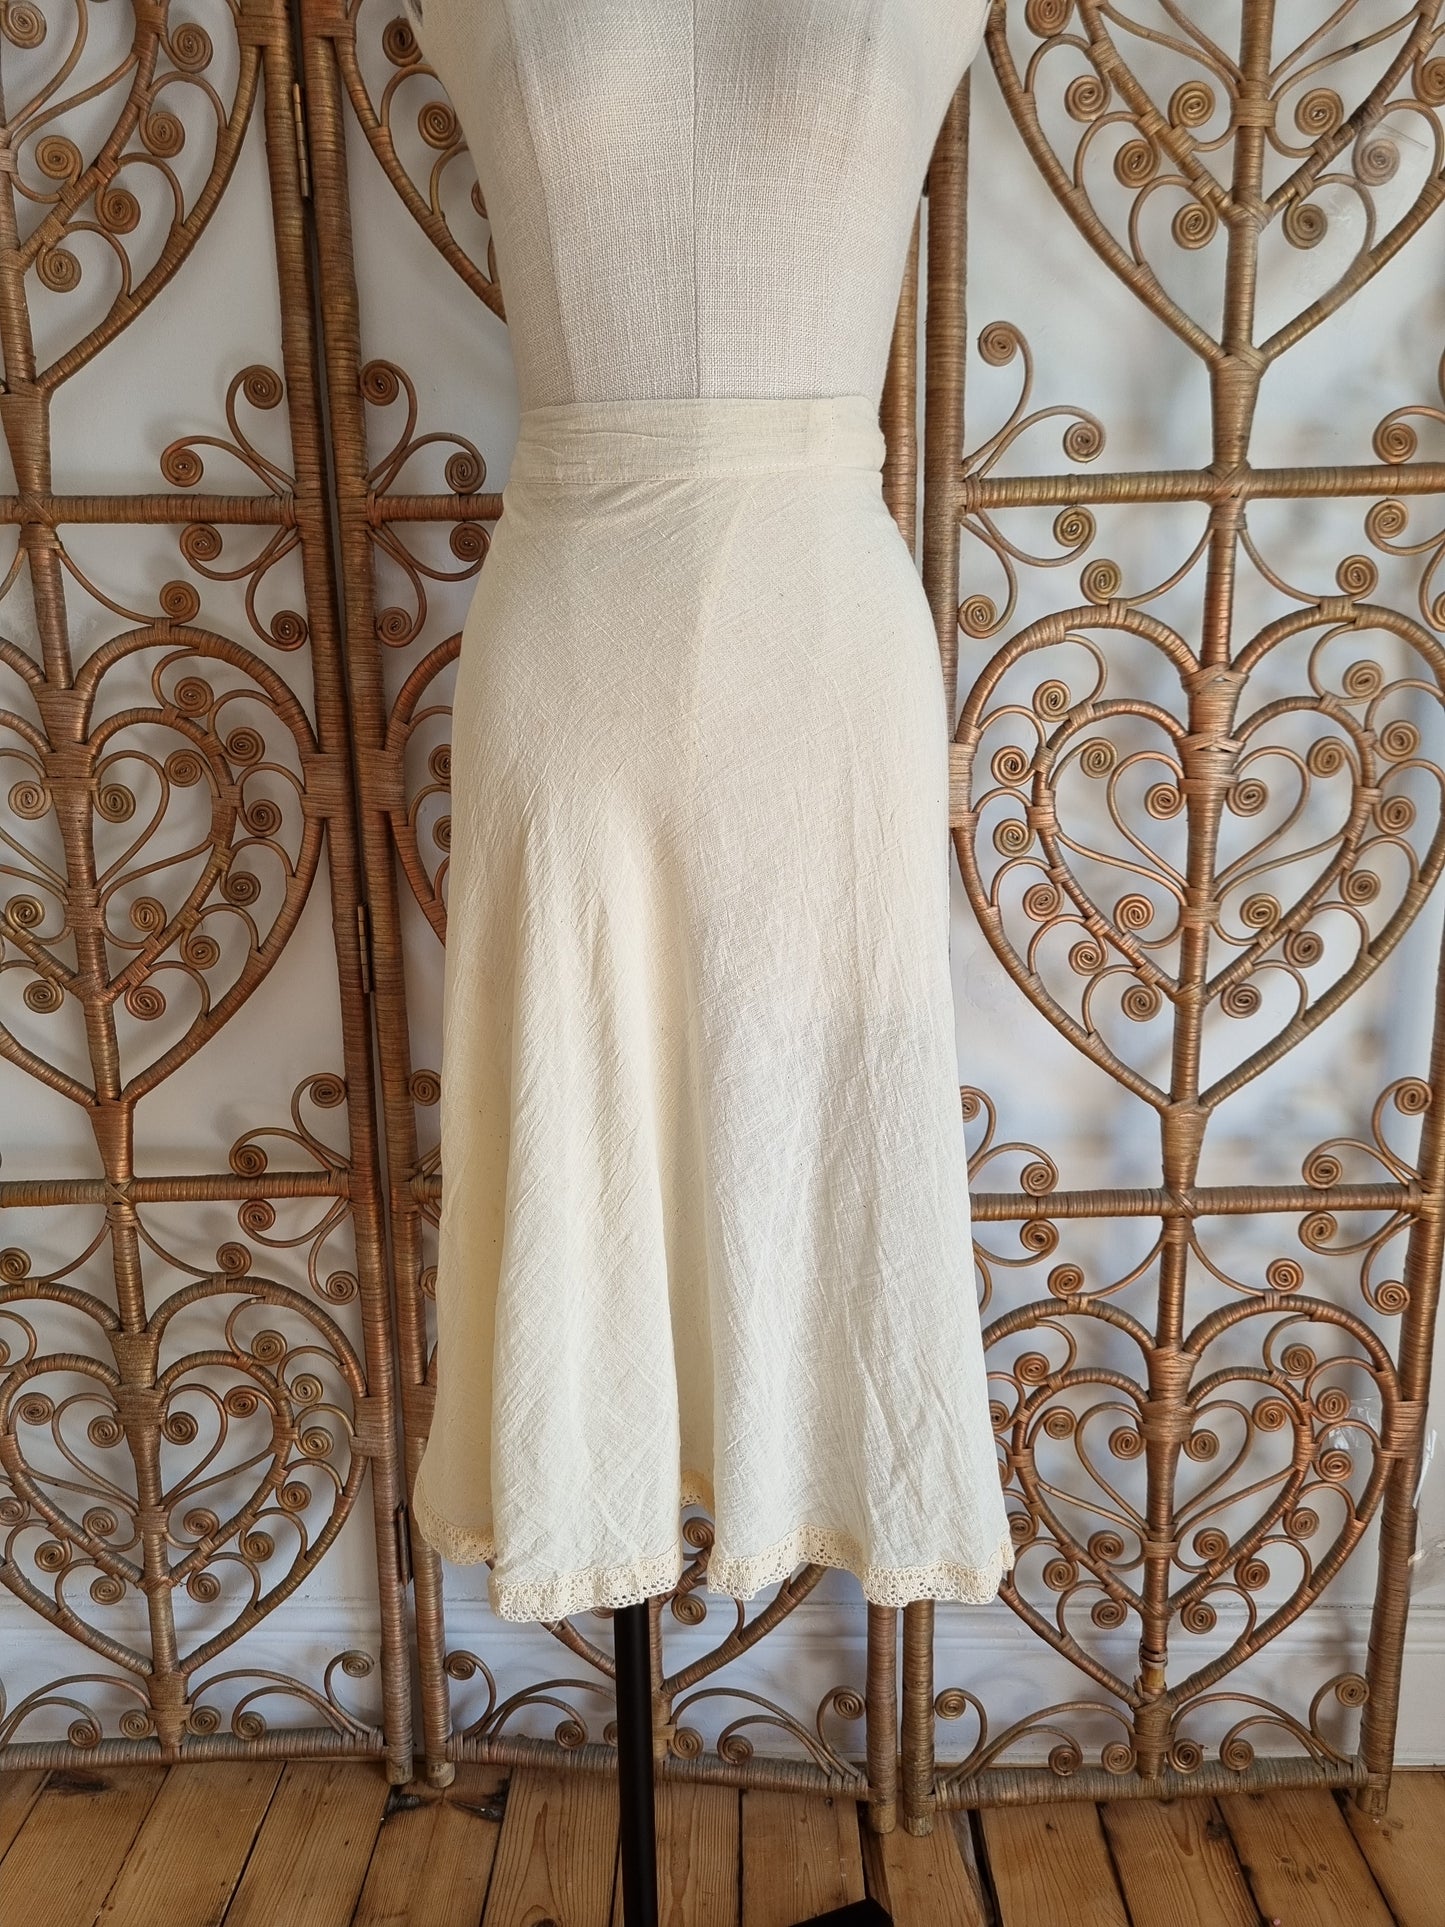 Vintage cheesecloth blouse skirt two piece s